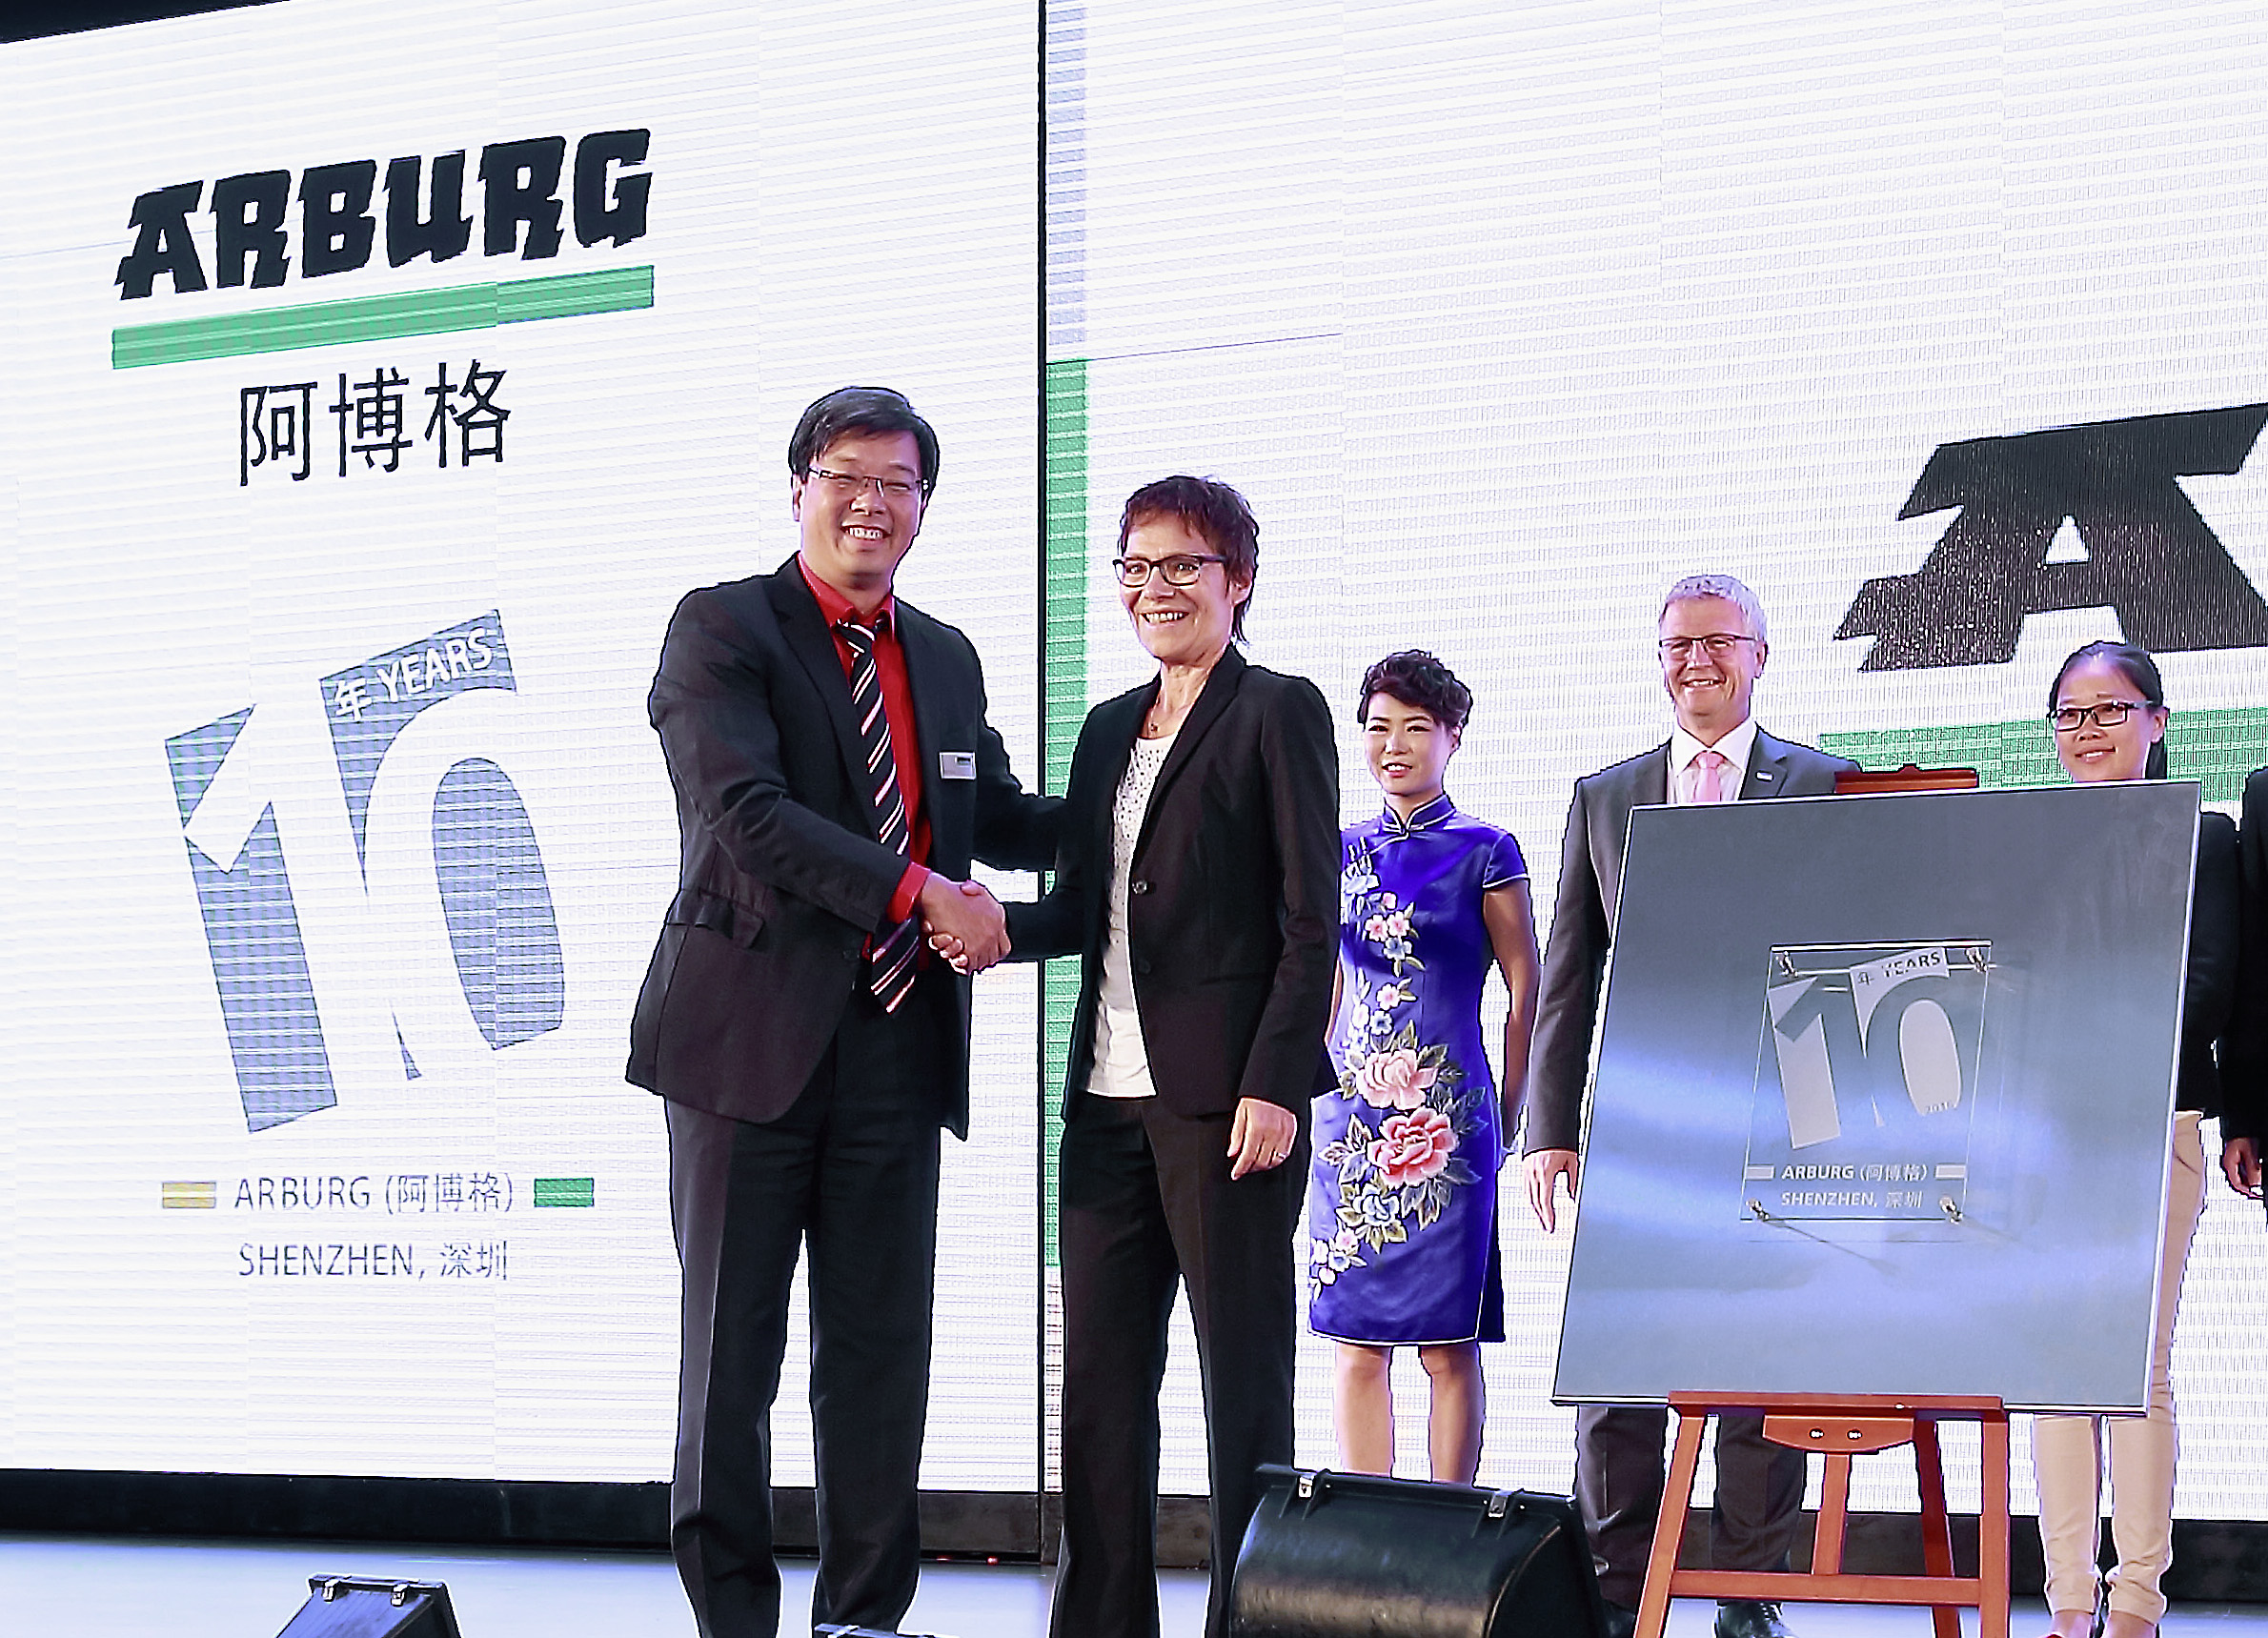 Managing Partner Renate Keinath (2nd from left) congratulated Zhao Tong (left), Managing Director of the Arburg organisations in China, on the anniversary. Also in the picture: Managing Director Sales Gerhard Böhm (2nd from right), together with Katie Xue and Ye Li (from the right). Photo: ARBURG 